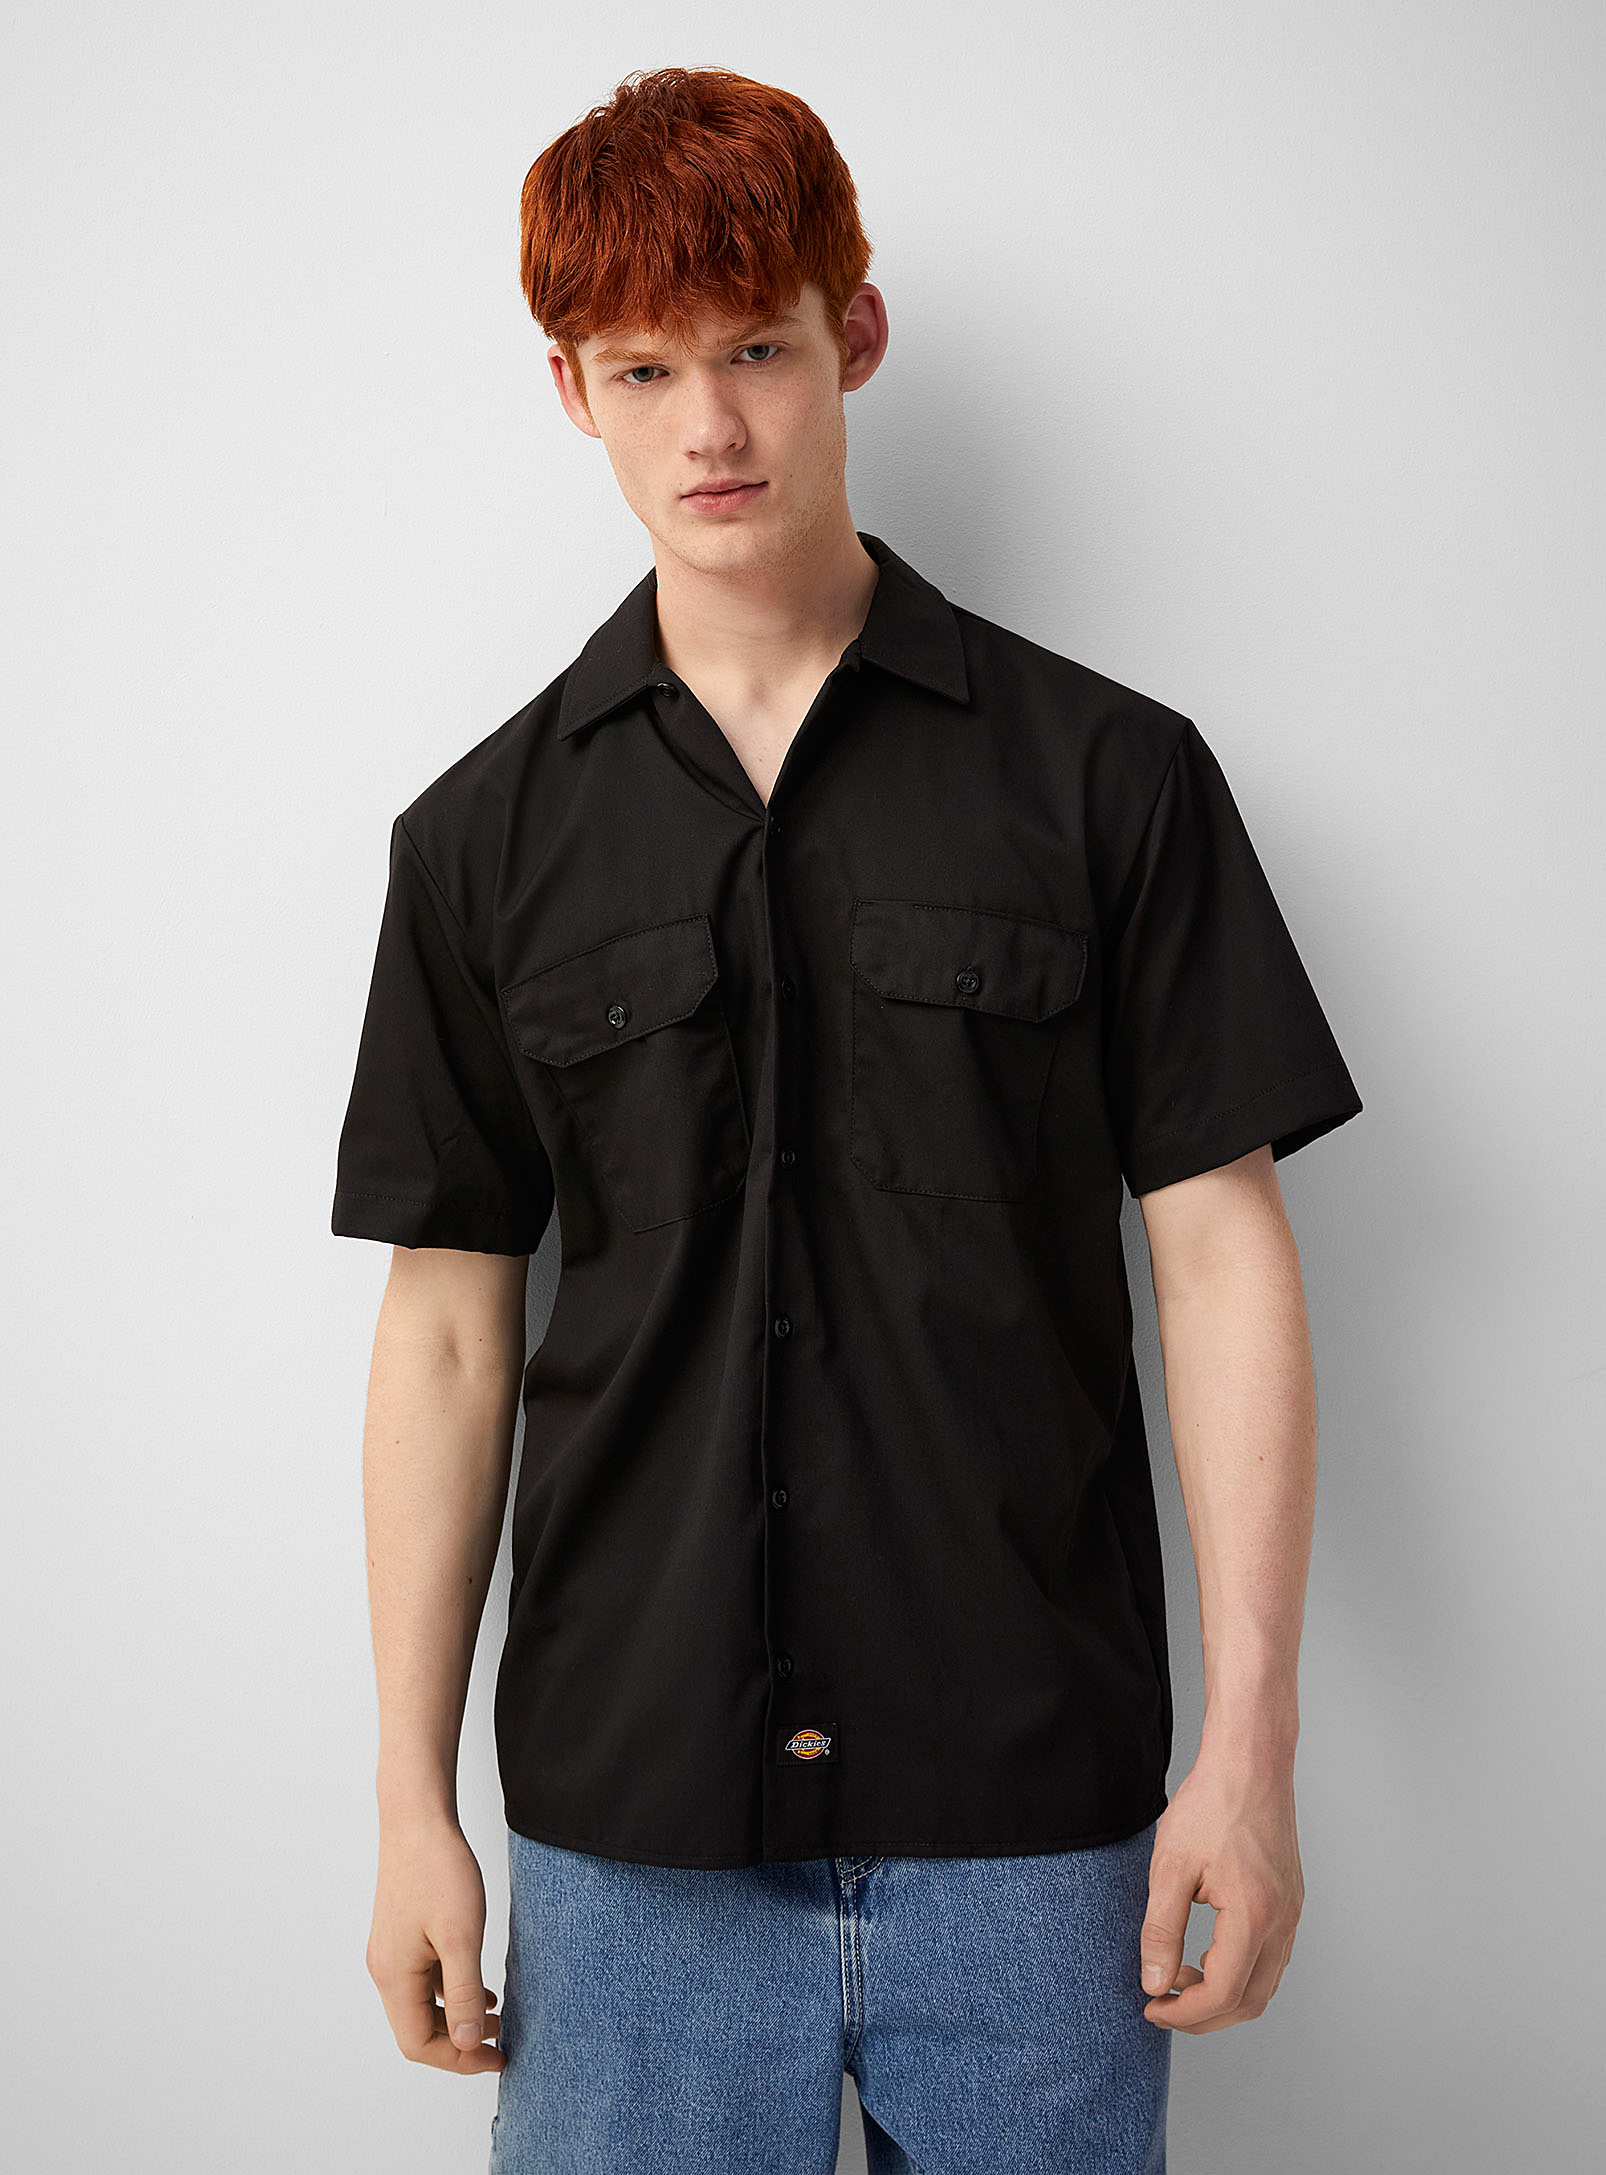 Dickies Short Sleeve Cotton Blend Shirt In Patterned Black